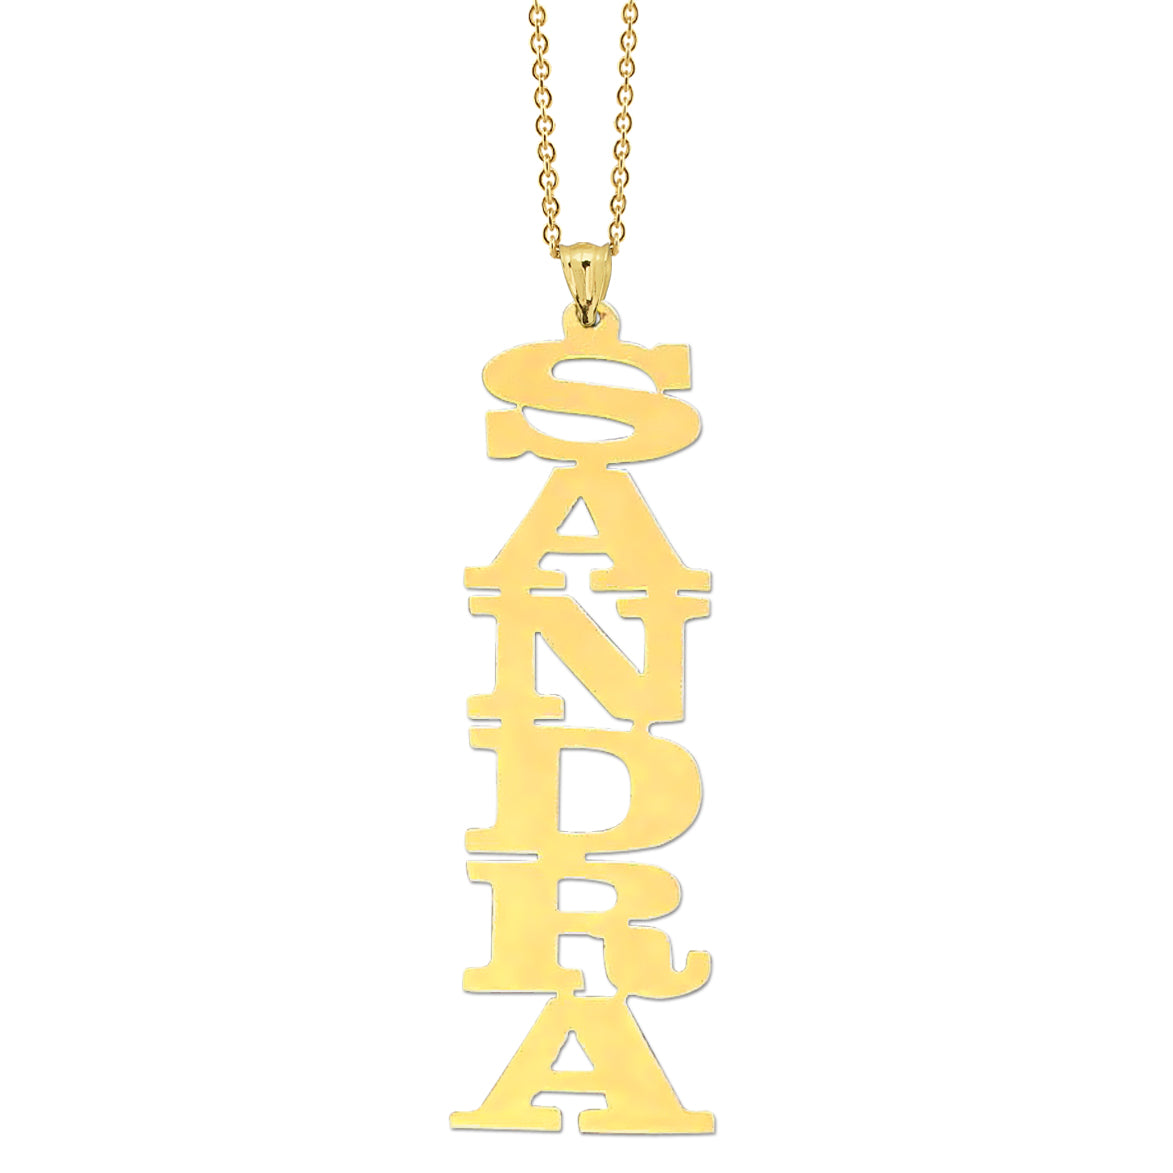 Personalized Gold Vertical Name Necklace 10k or 14k Pendant Custom Made Fine Jewelry.